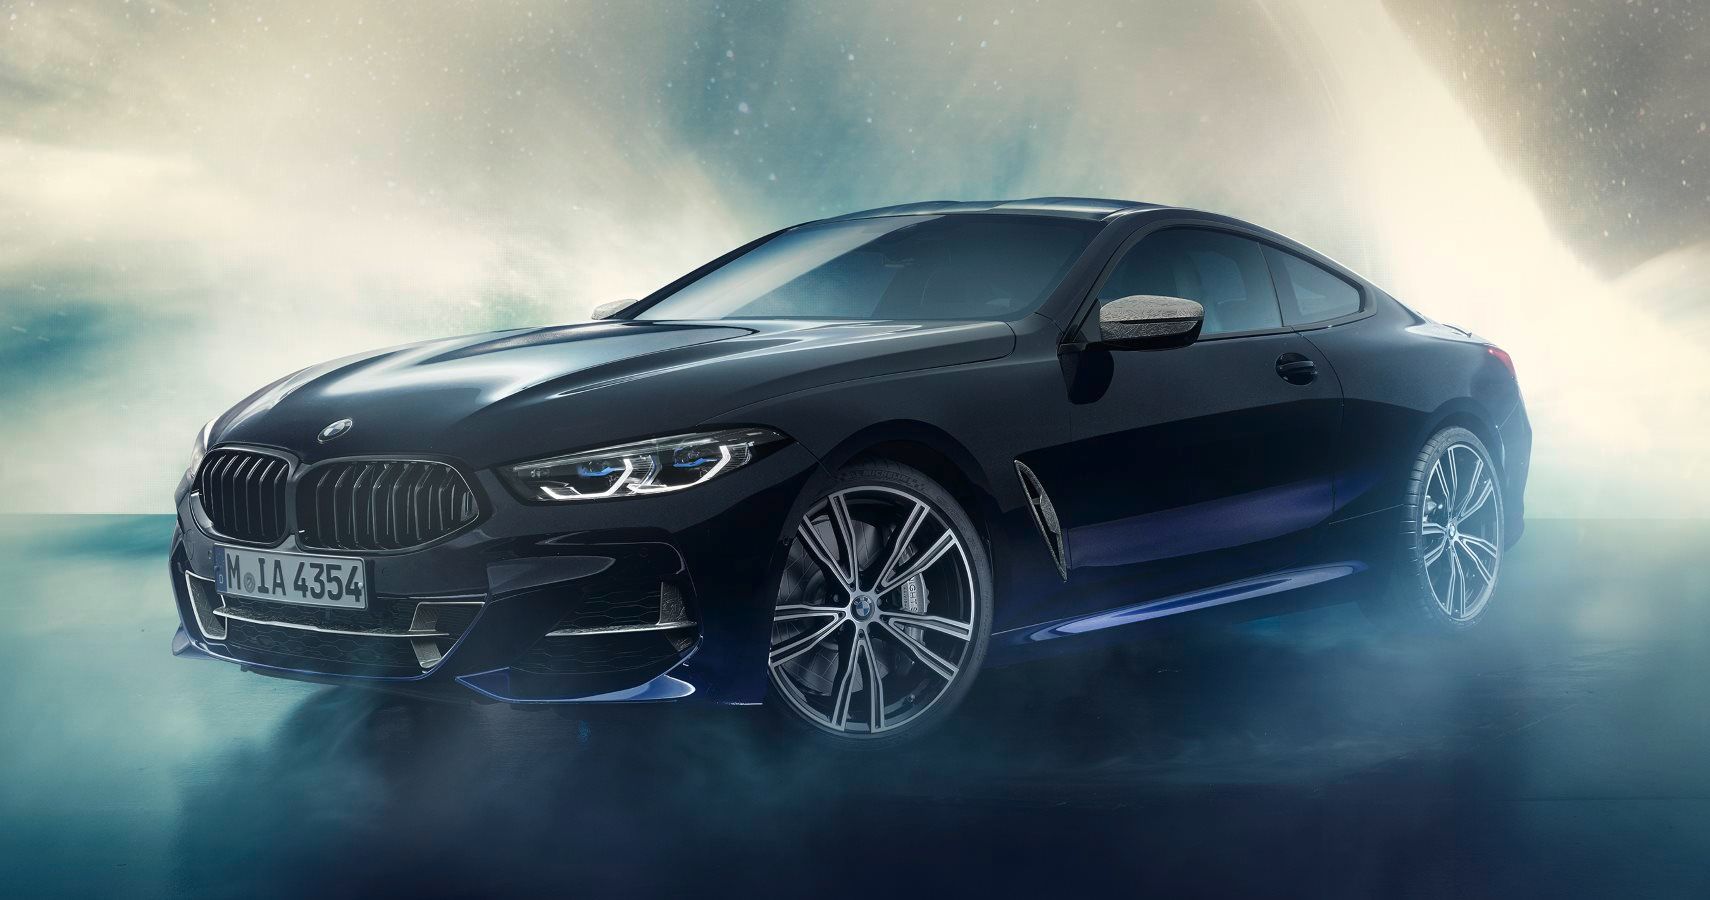 BMW 8 Series Has Meteorites In Its Night Sky Special Edition